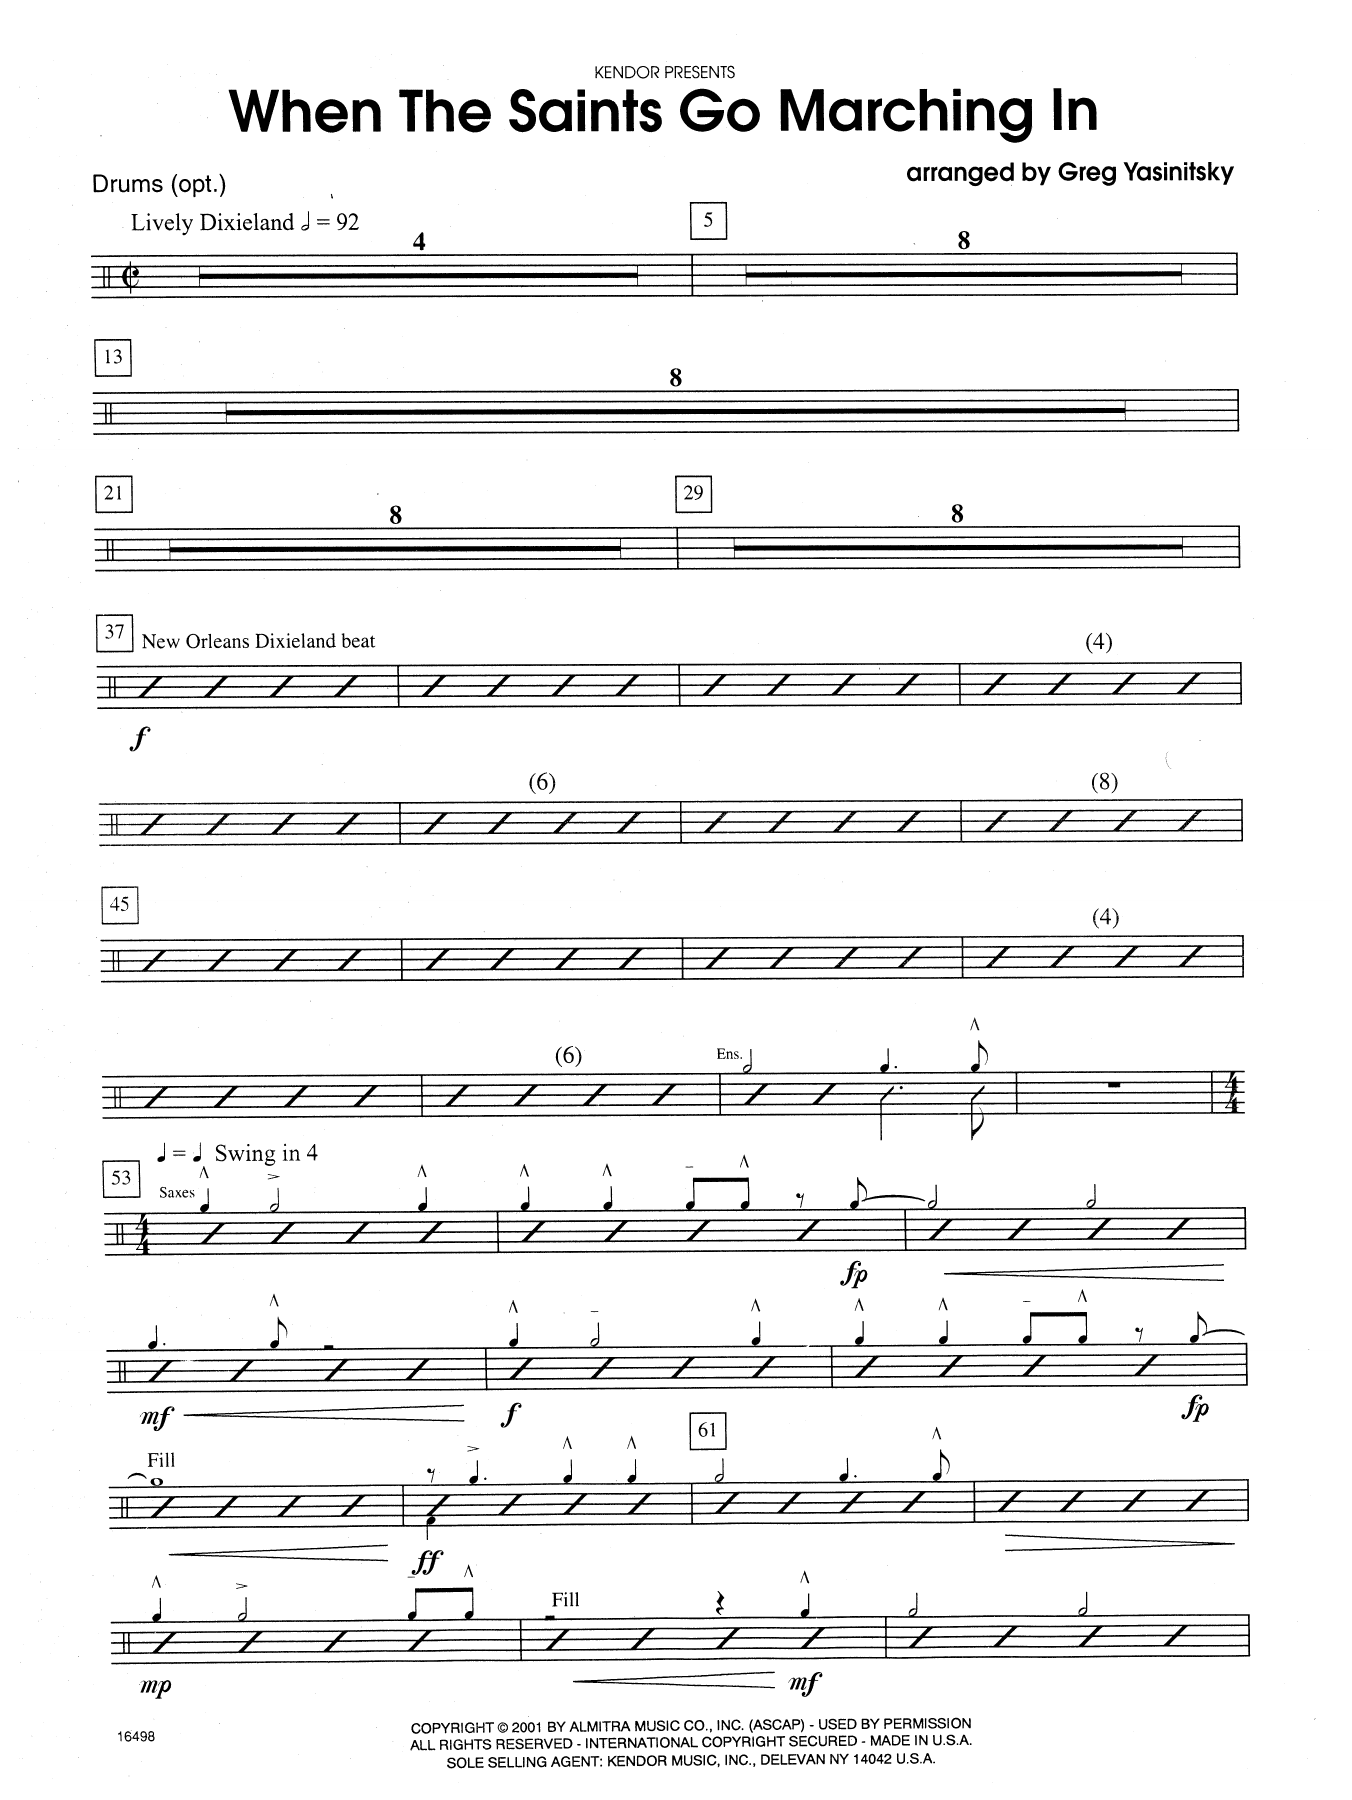 Download Gregory Yasinitsky When the Saints Go Marching In - Drum S Sheet Music